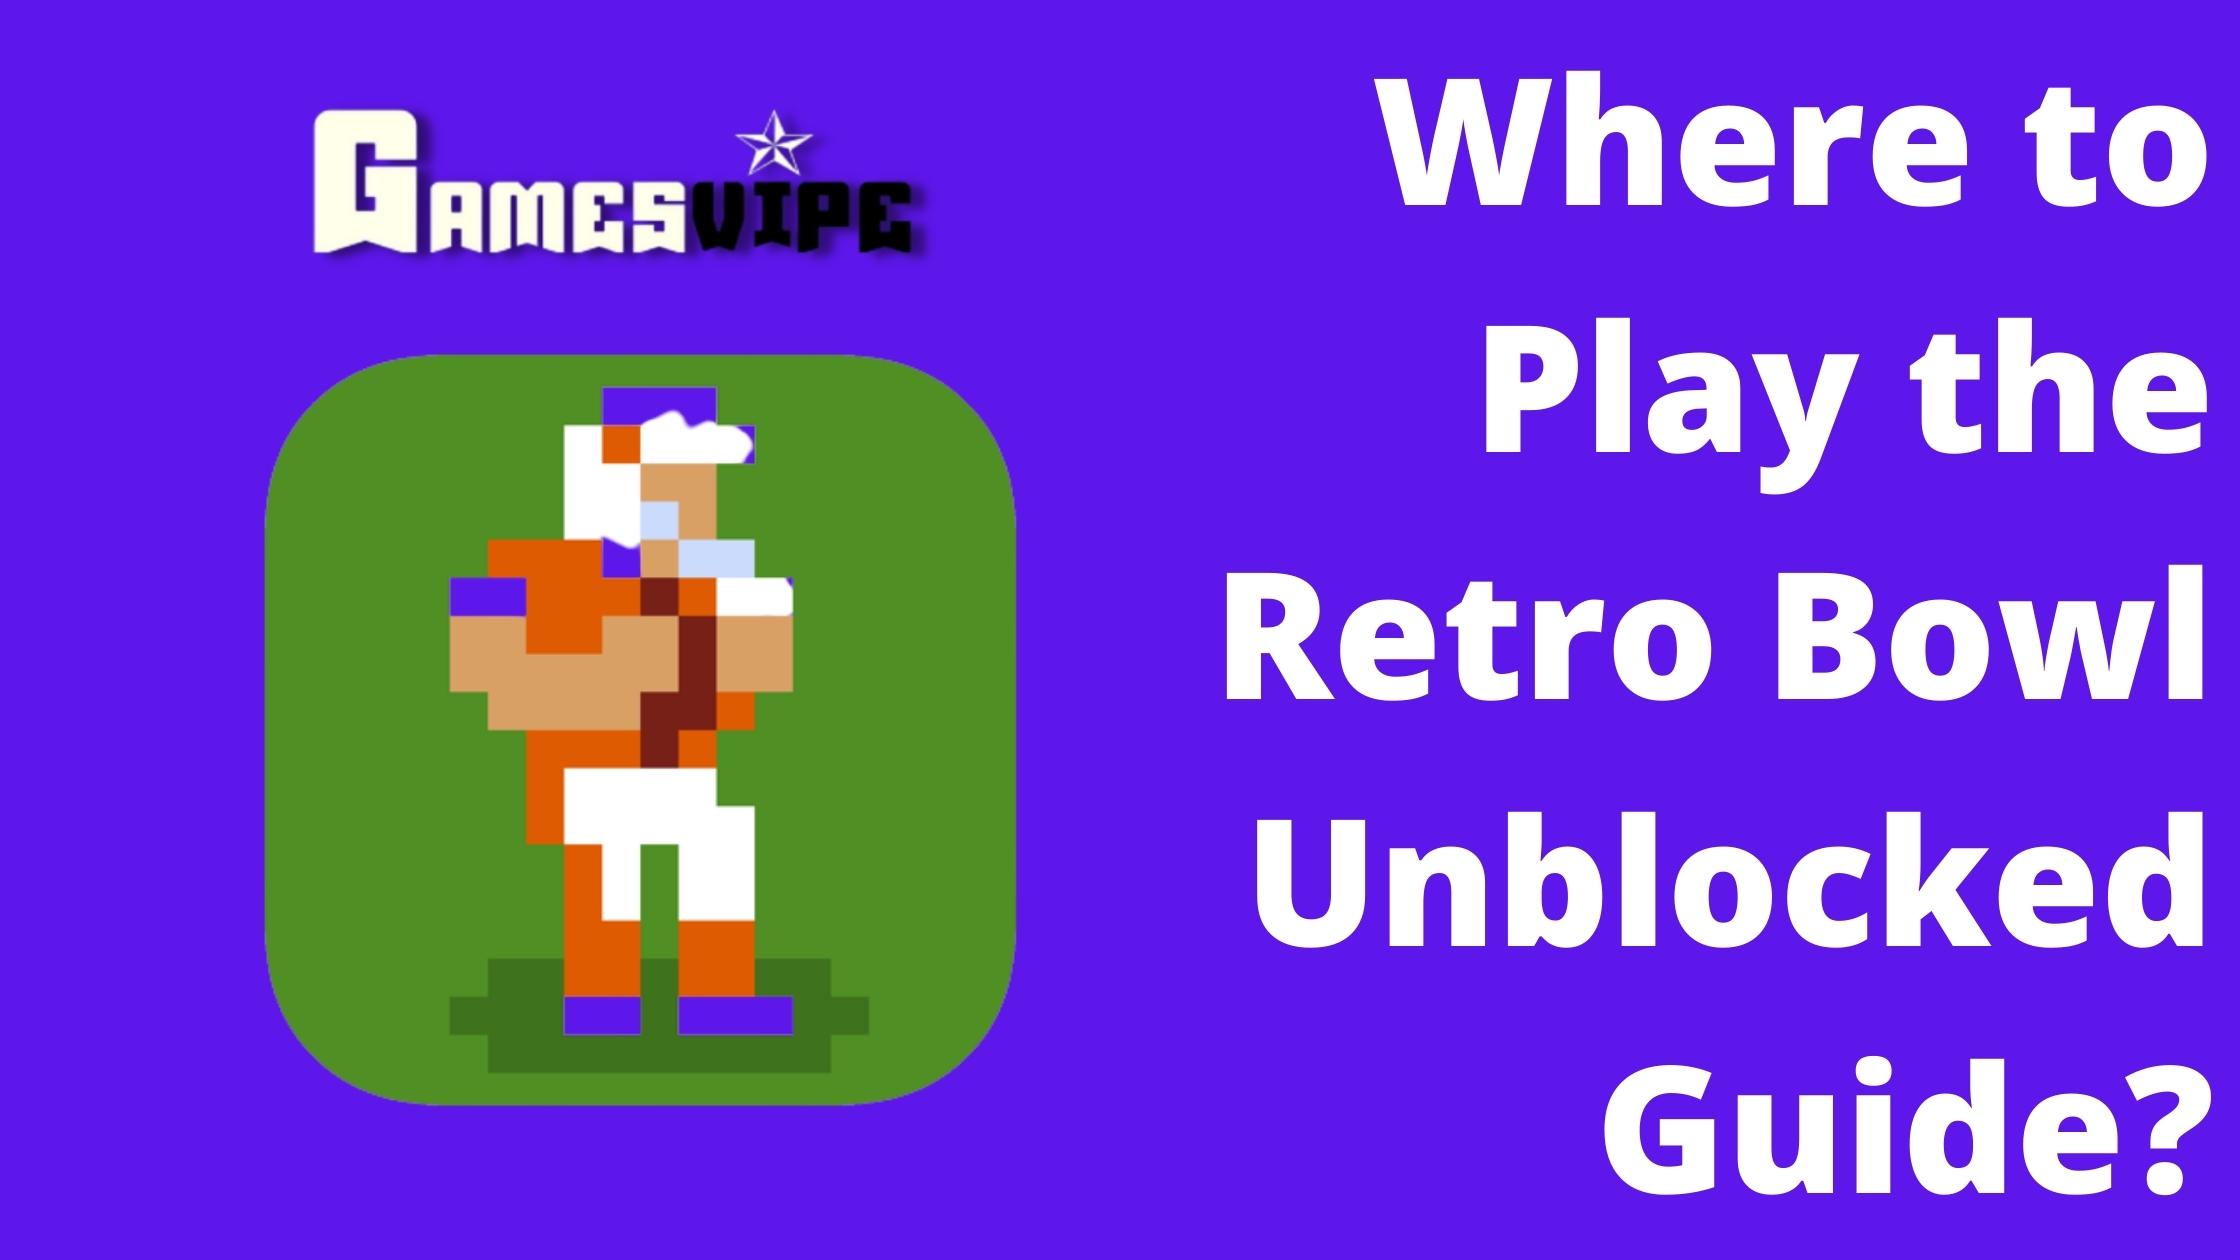 Play the Retro Bowl Unblocked Guide